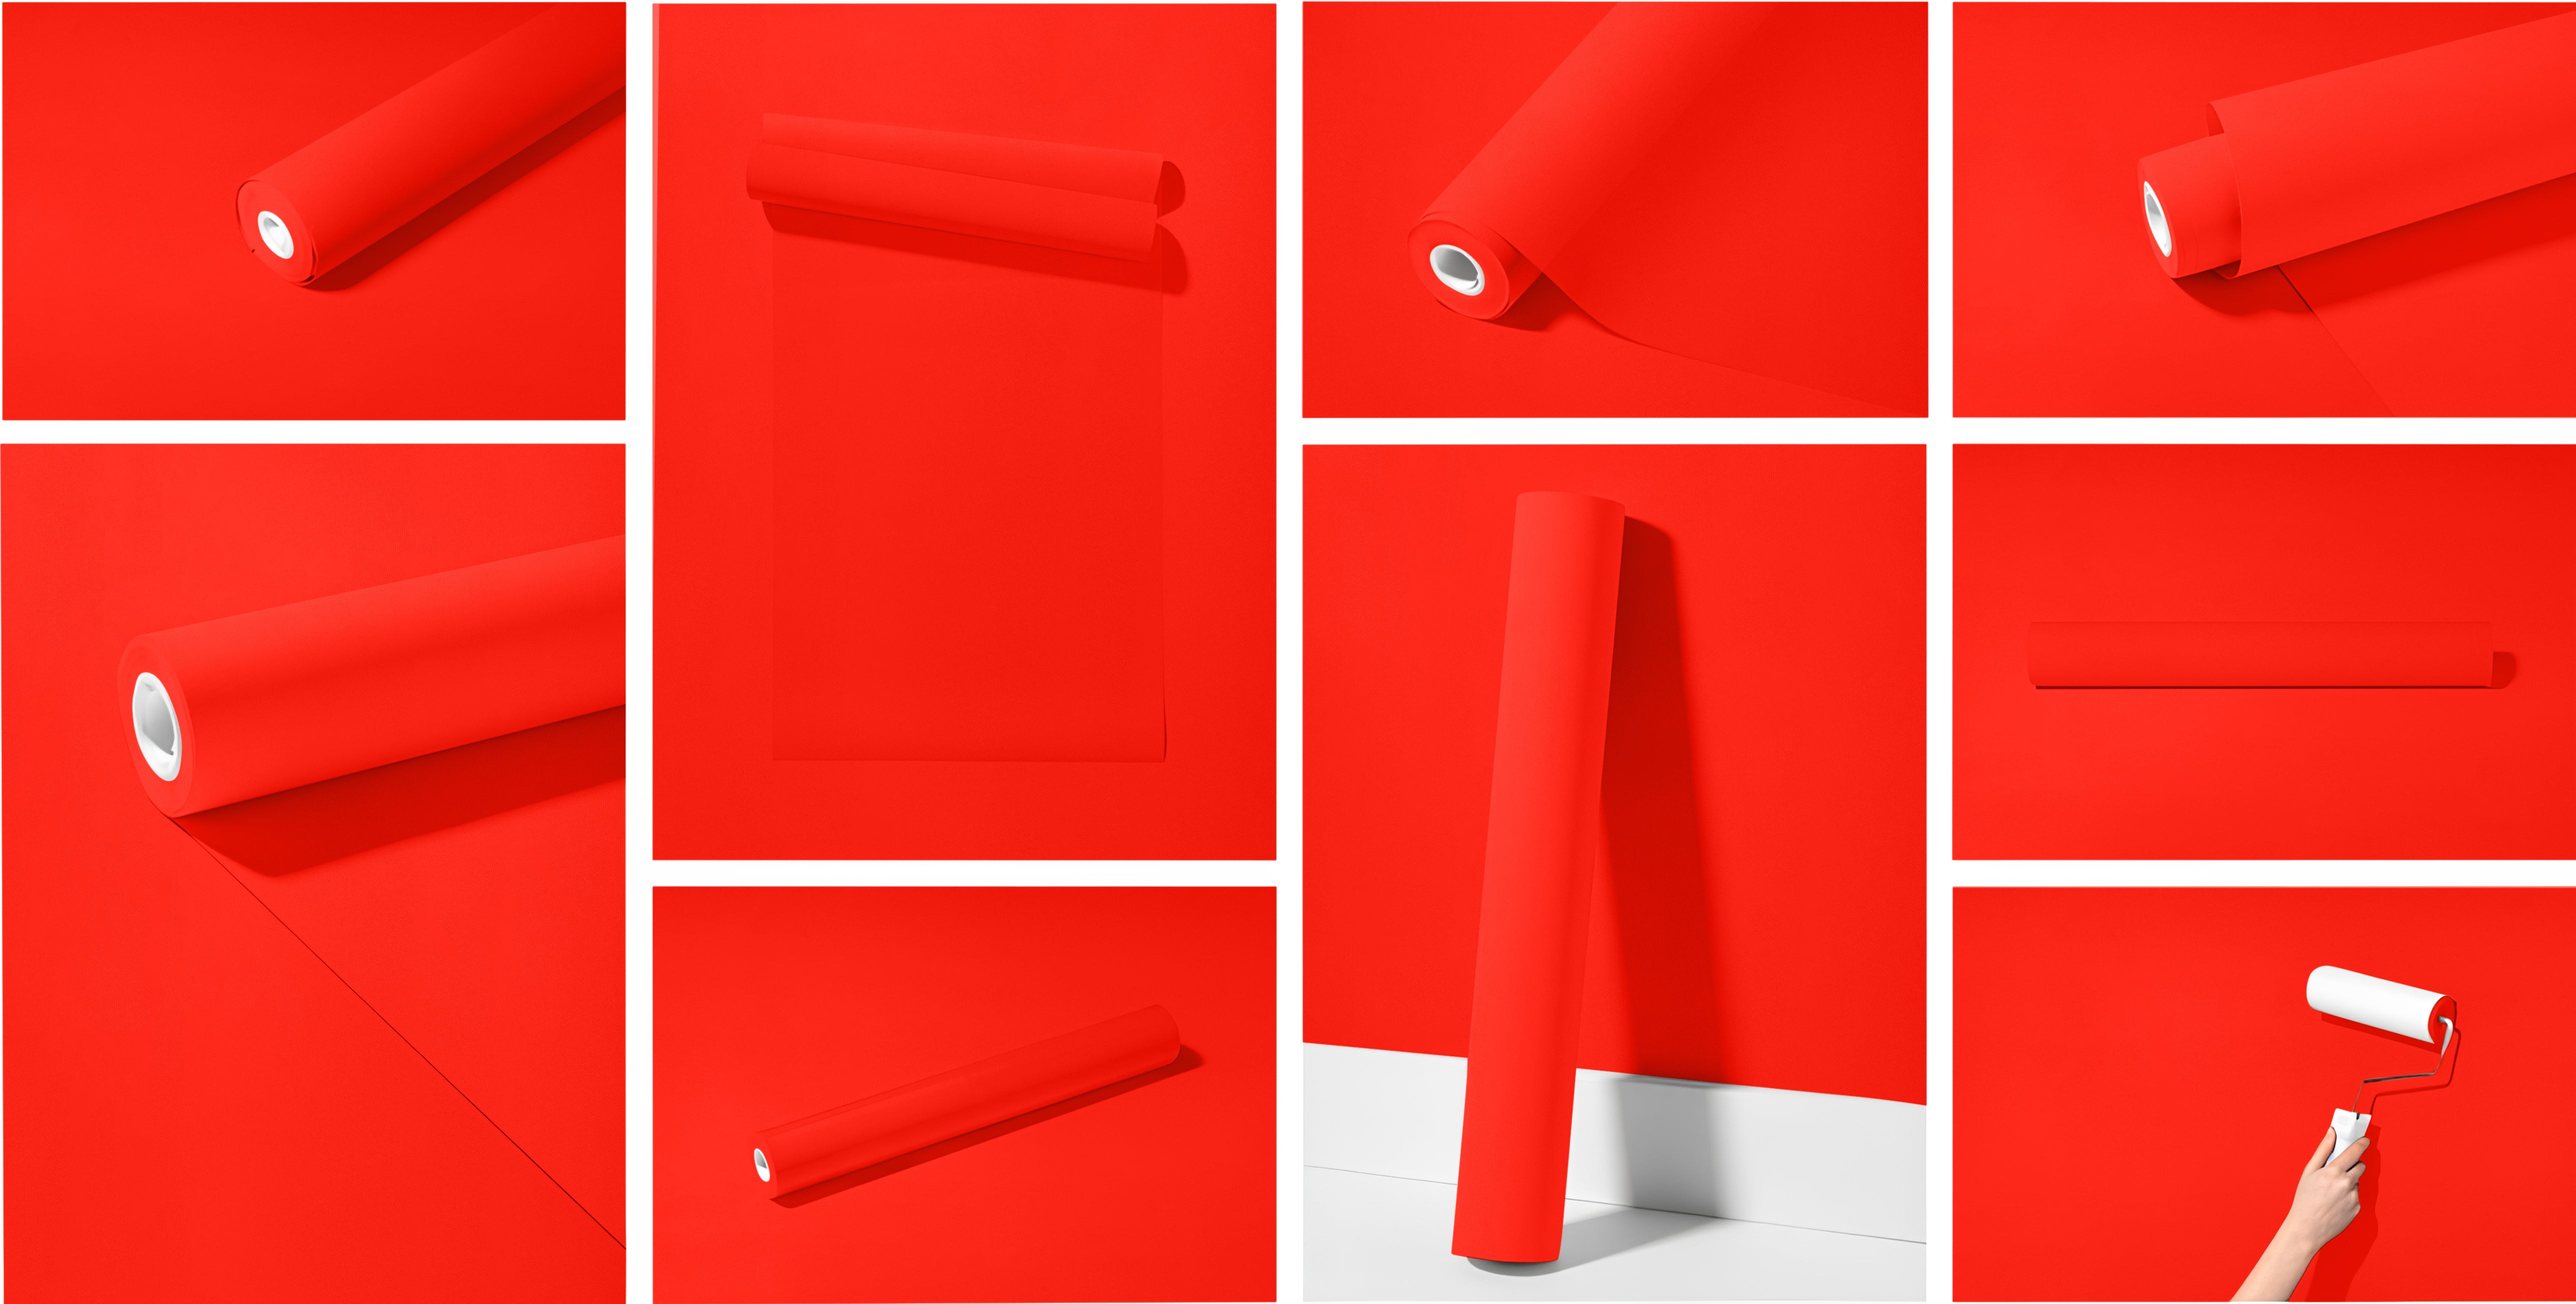 Peel & Stick Removable Re-usable Paint - Color RAL 3026 Luminous Bright Red - offRAL™ - RALRAW LLC, USA